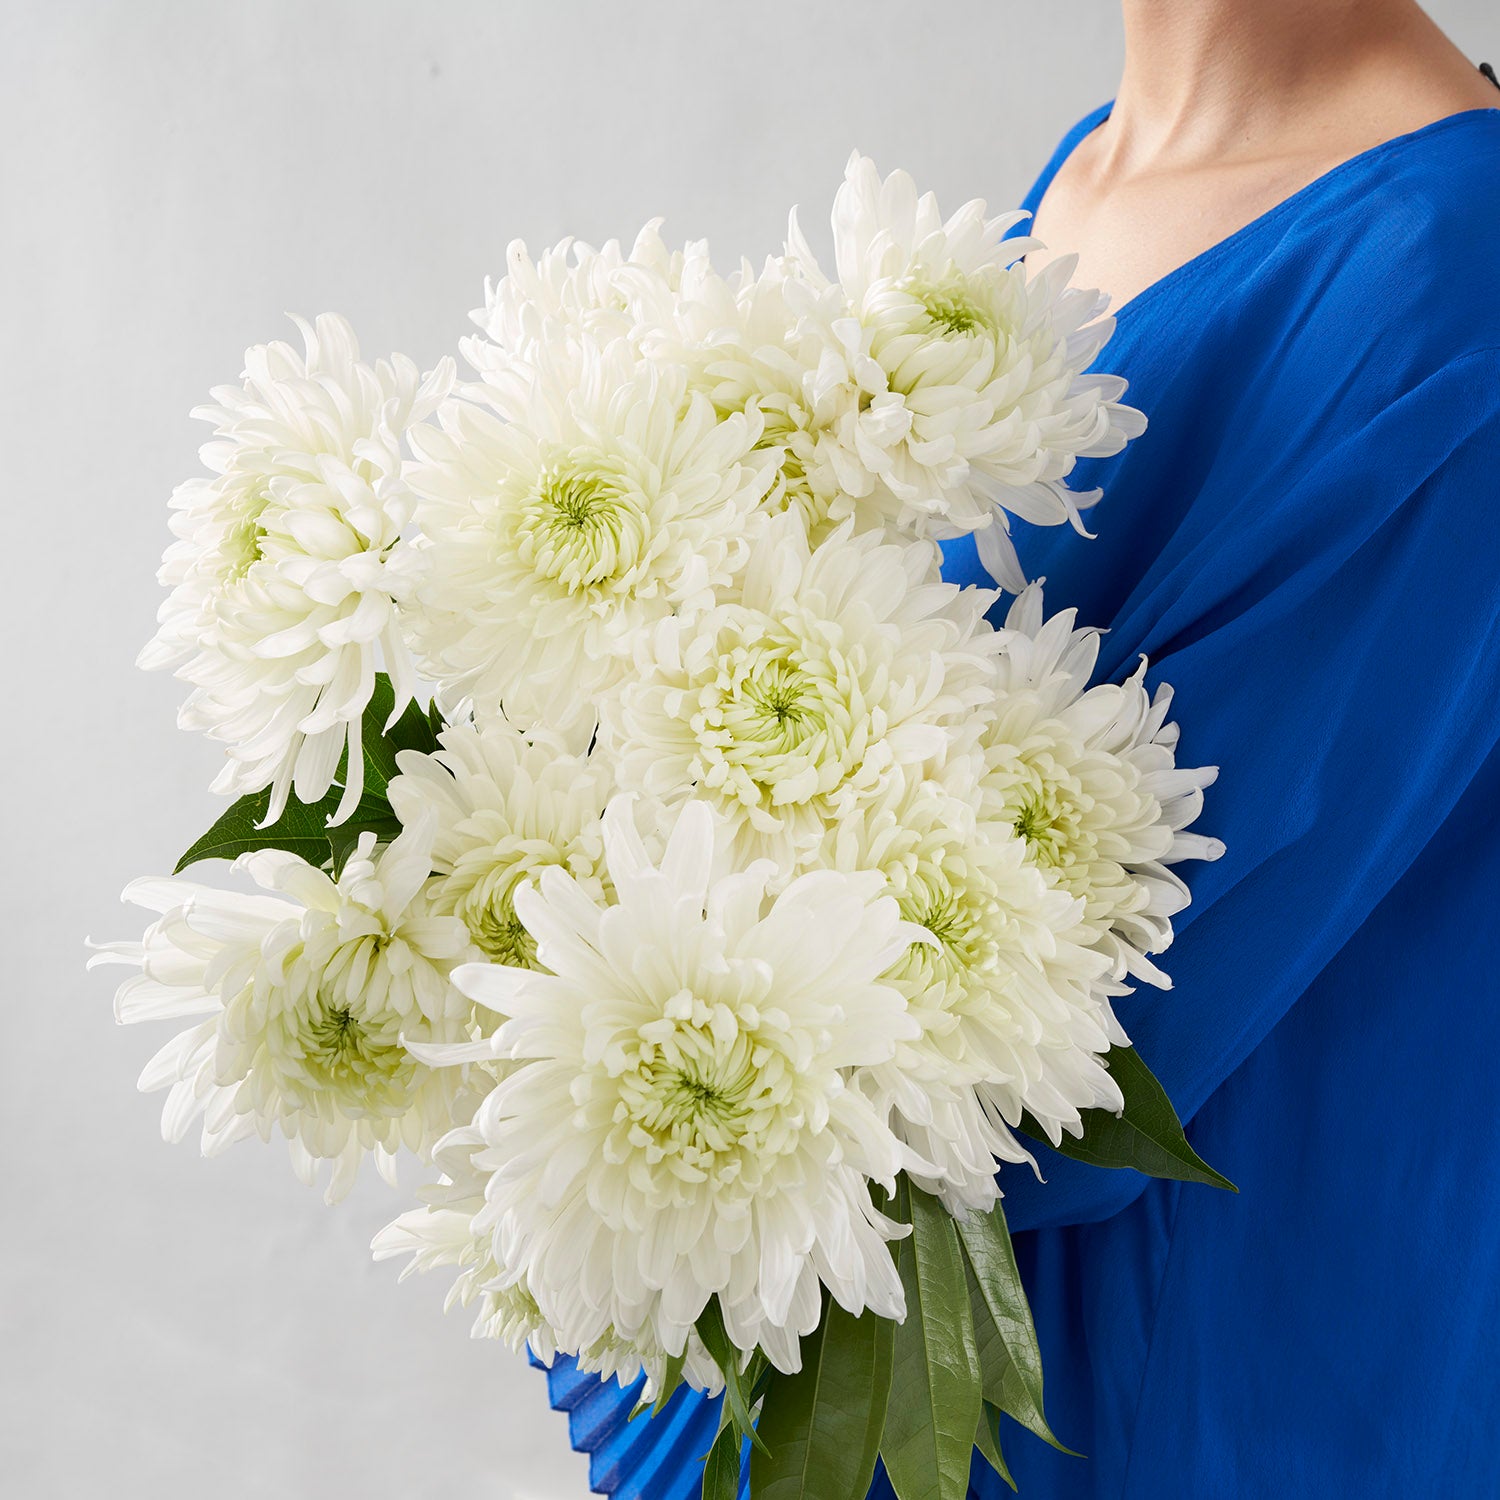 Woman in royal blue dress holding large bouquet of chrysanthemums.